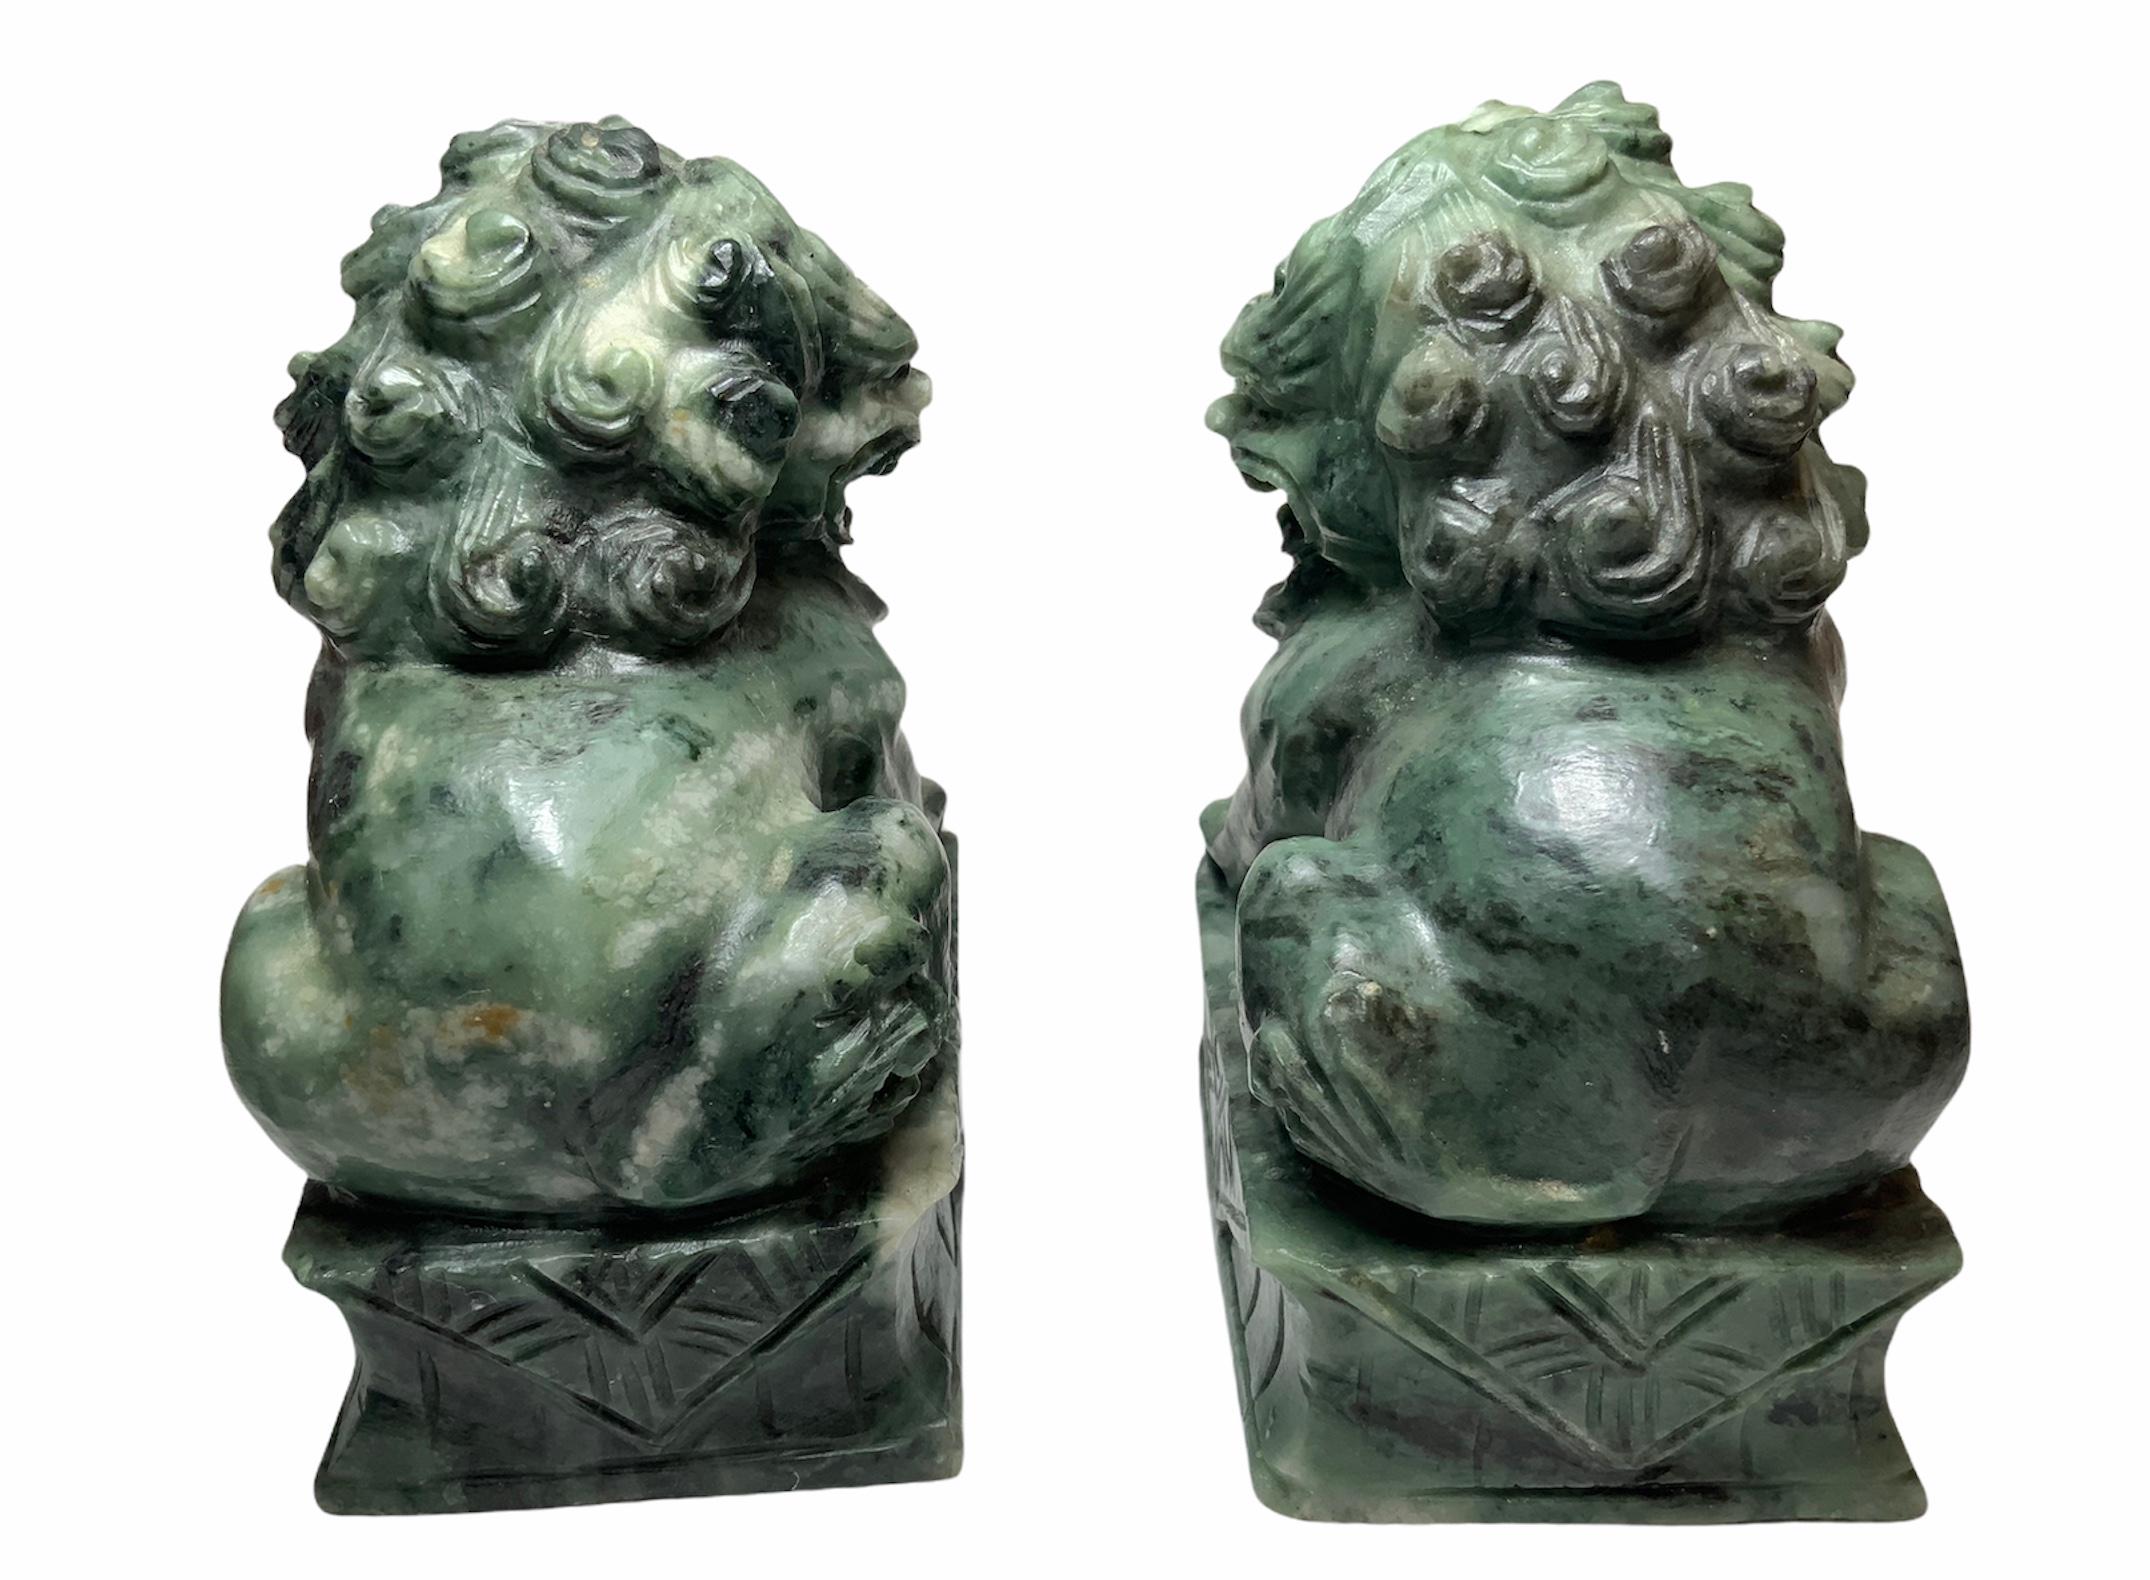 Hand-Carved Hand Carved Green Stone Small Chinese Foo-Dogs Sculptures/Figurines For Sale